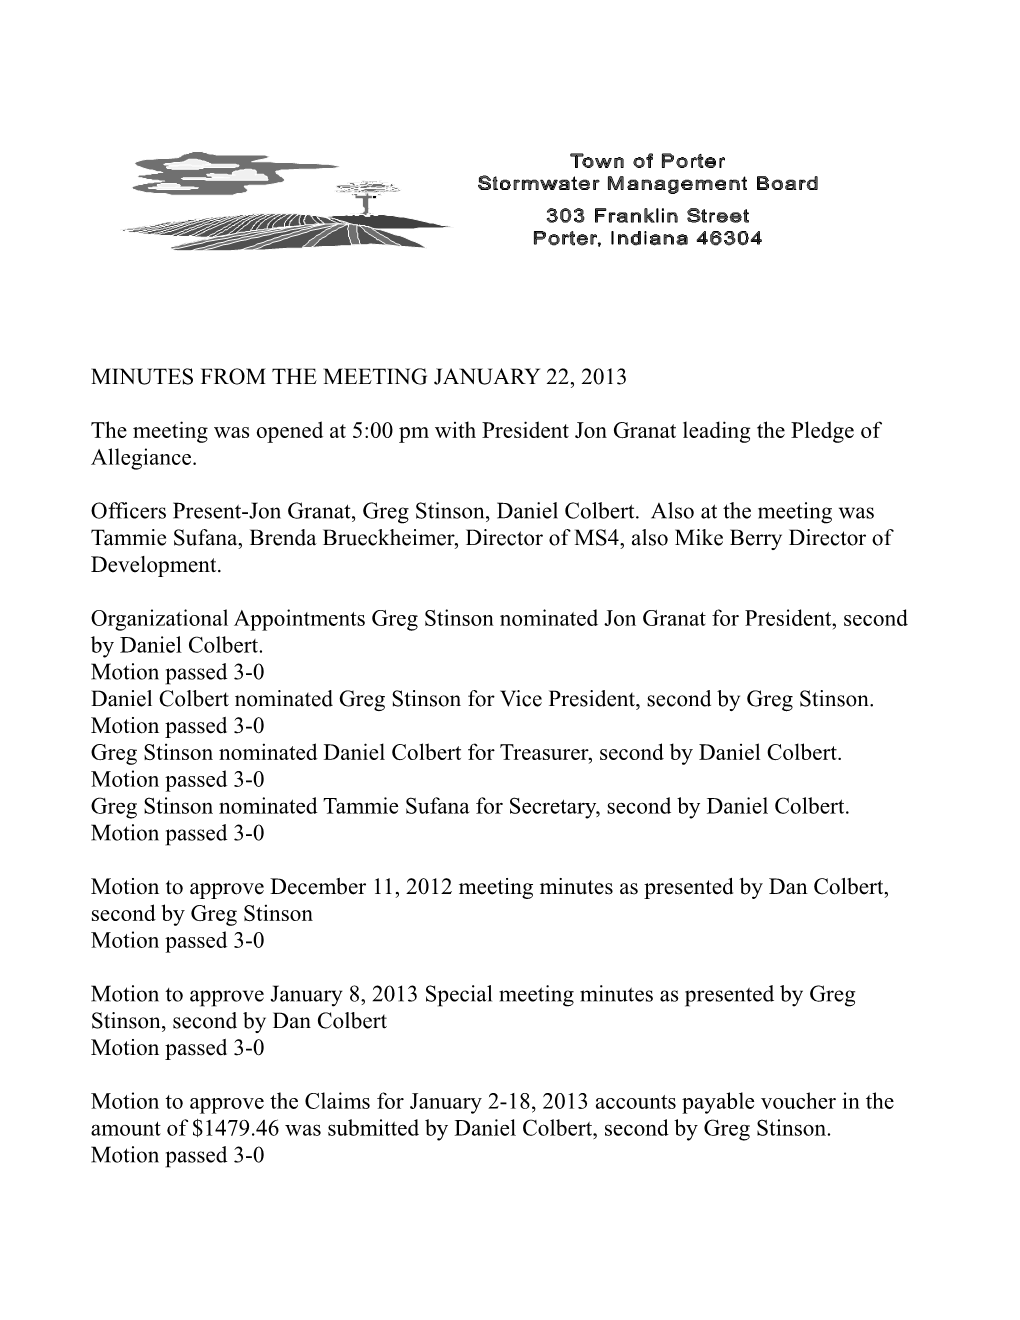 Minutes from Themeeting January 22, 2013